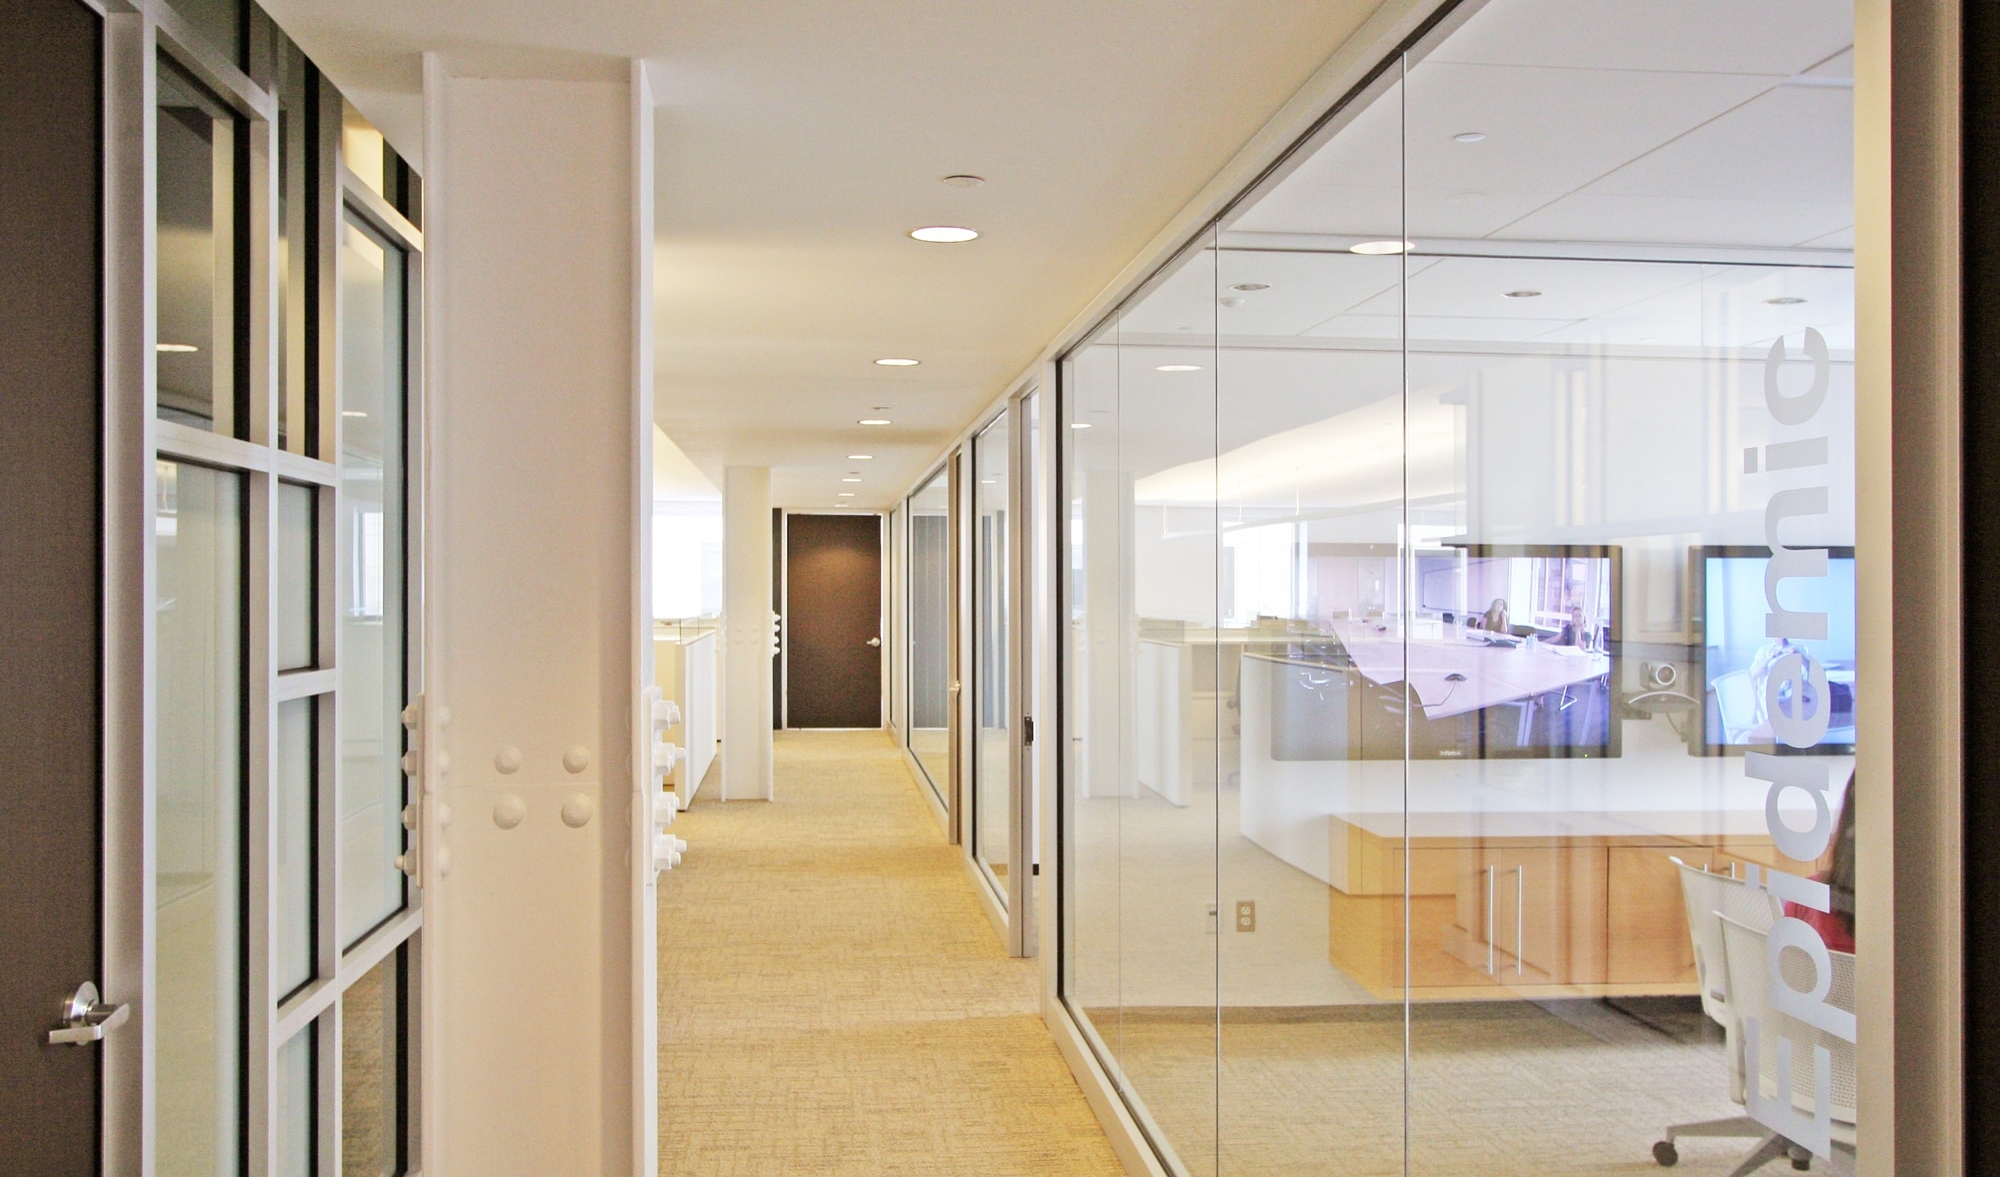 res4-resolution-4-architecture-modern-commercial-rms-riskmanagementsolutions-hoboken-newjersey-interior-office-hallway-1.jpg